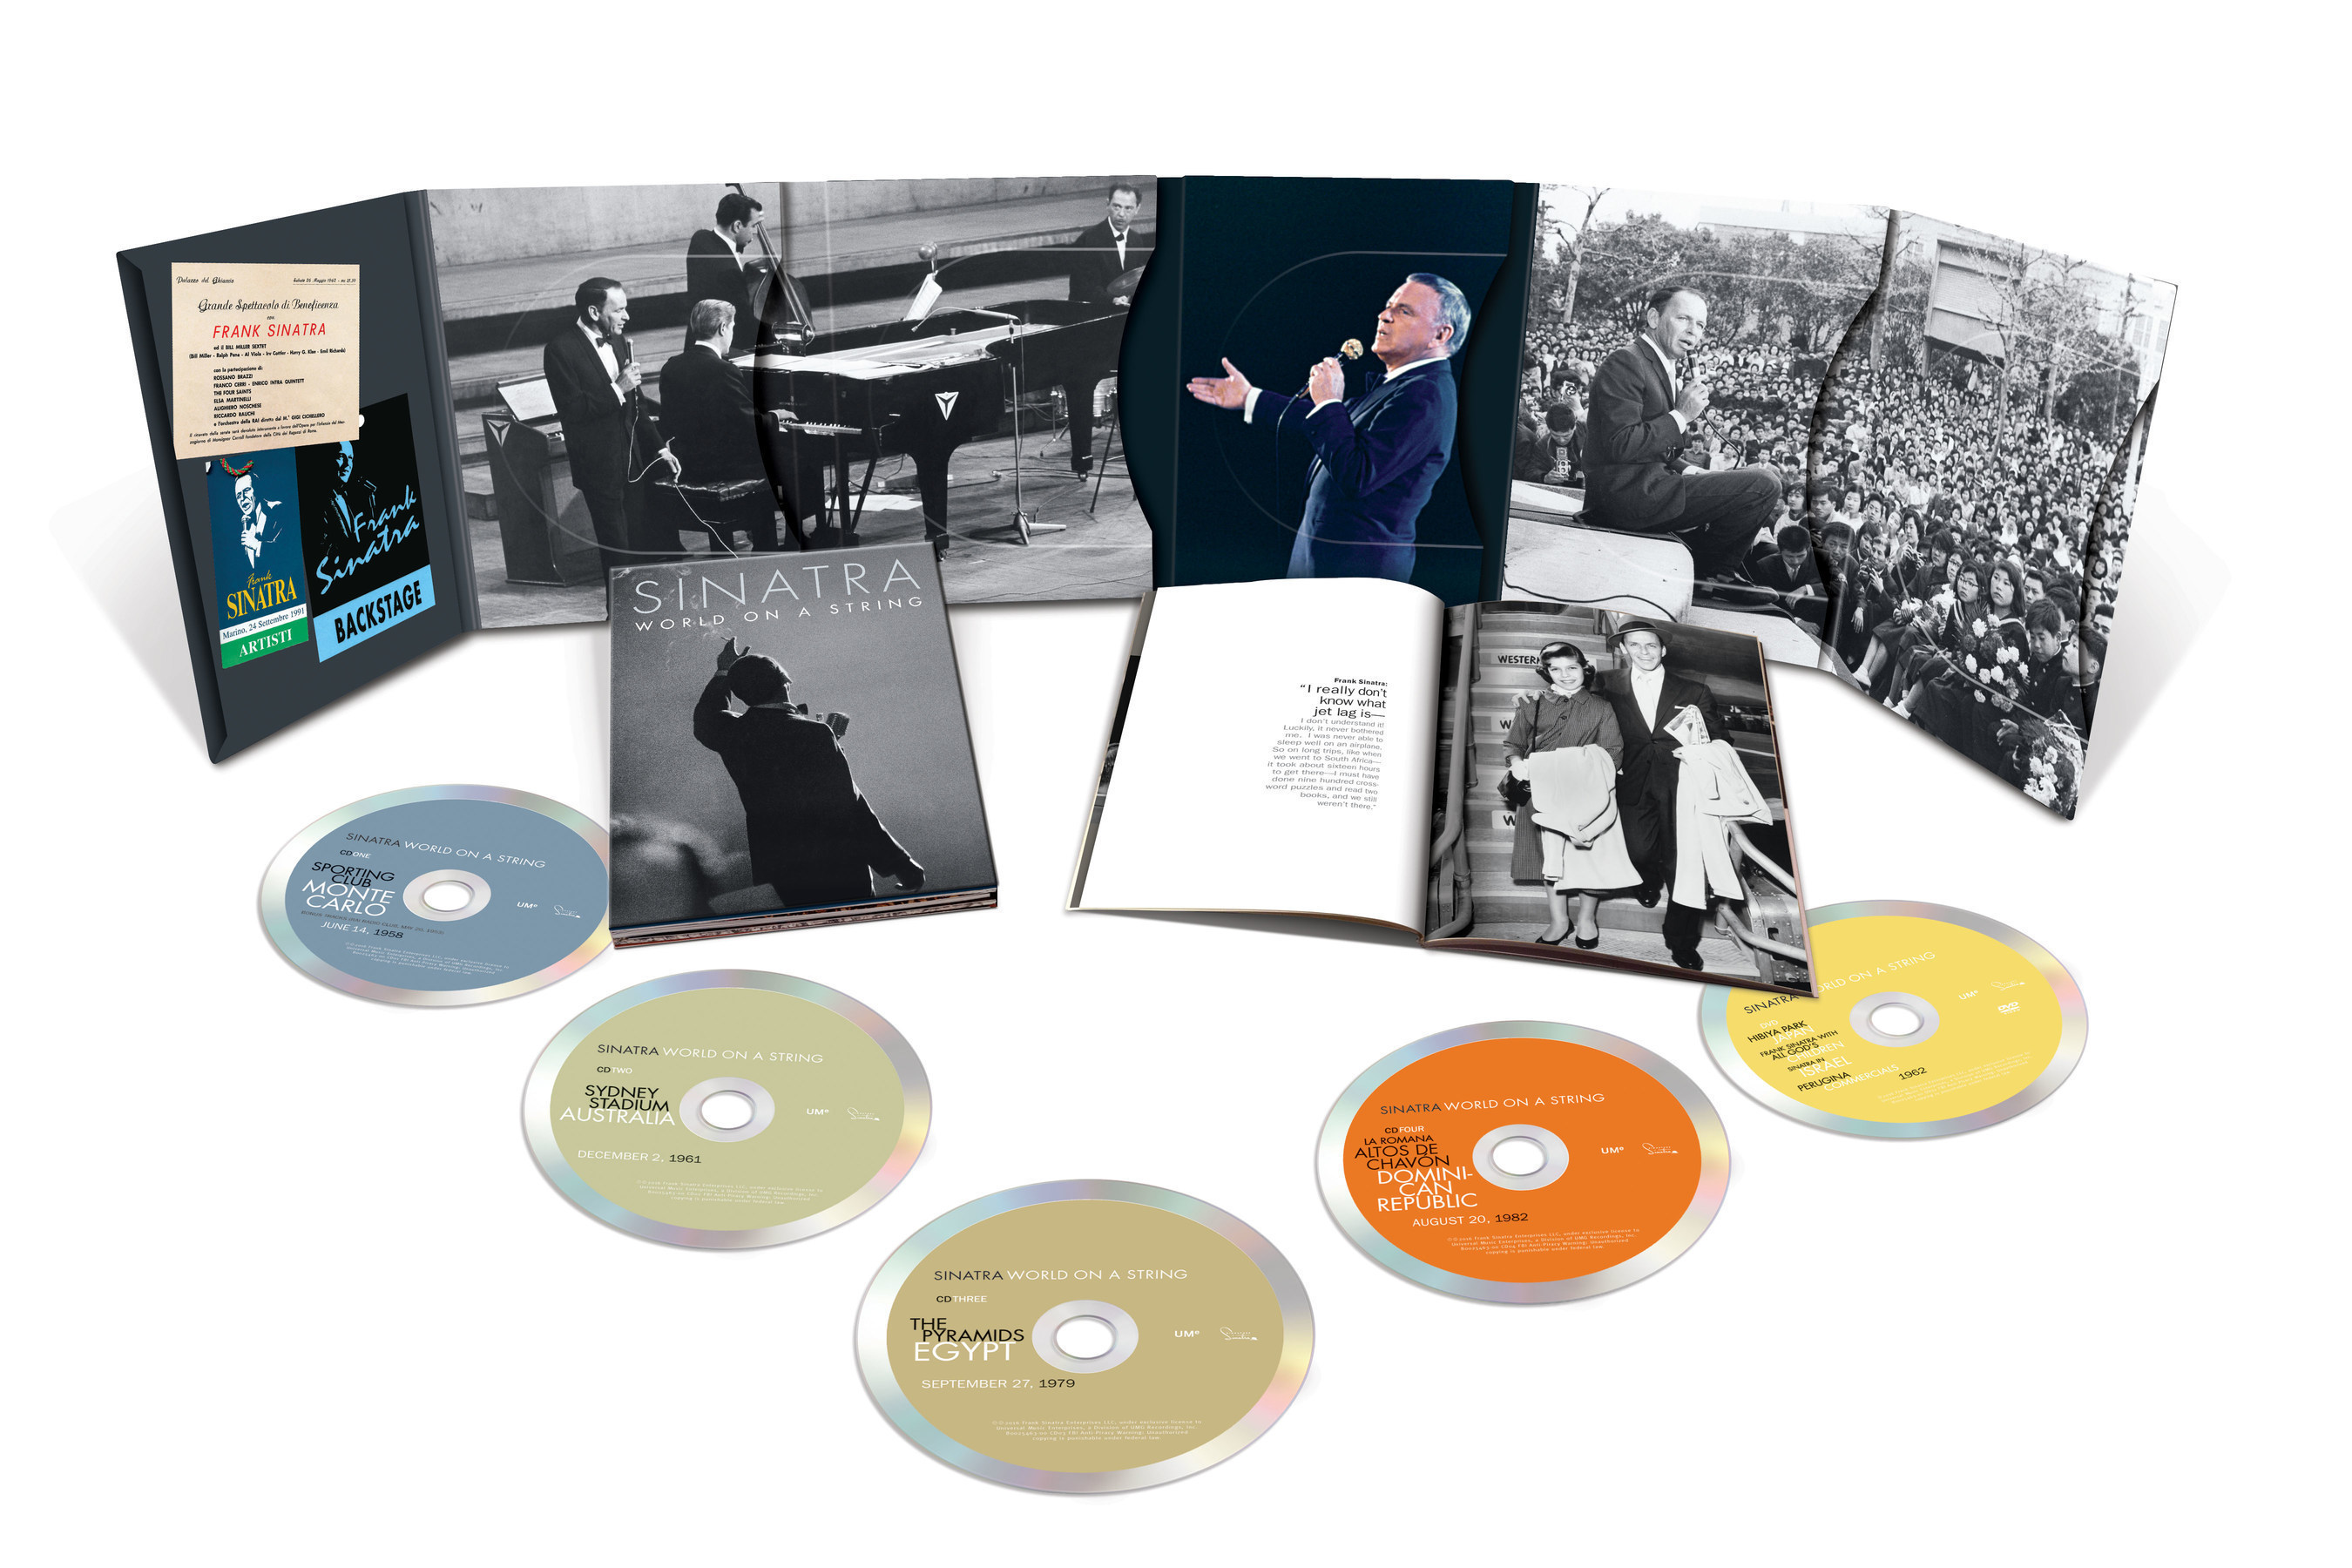 Set for worldwide release on October 21 by UMe and Frank Sinatra Enterprises, 'World On A String' is a portrait of the iconic American entertainer in his prime on international stages. As a time capsule of Sinatra's enduring appeal across the globe, the 4CD/DVD box set (also available in digital audio) is a treasure trove of live recordings from 1953 to 1982, totaling more than four hours of previously unissued audio and video footage.